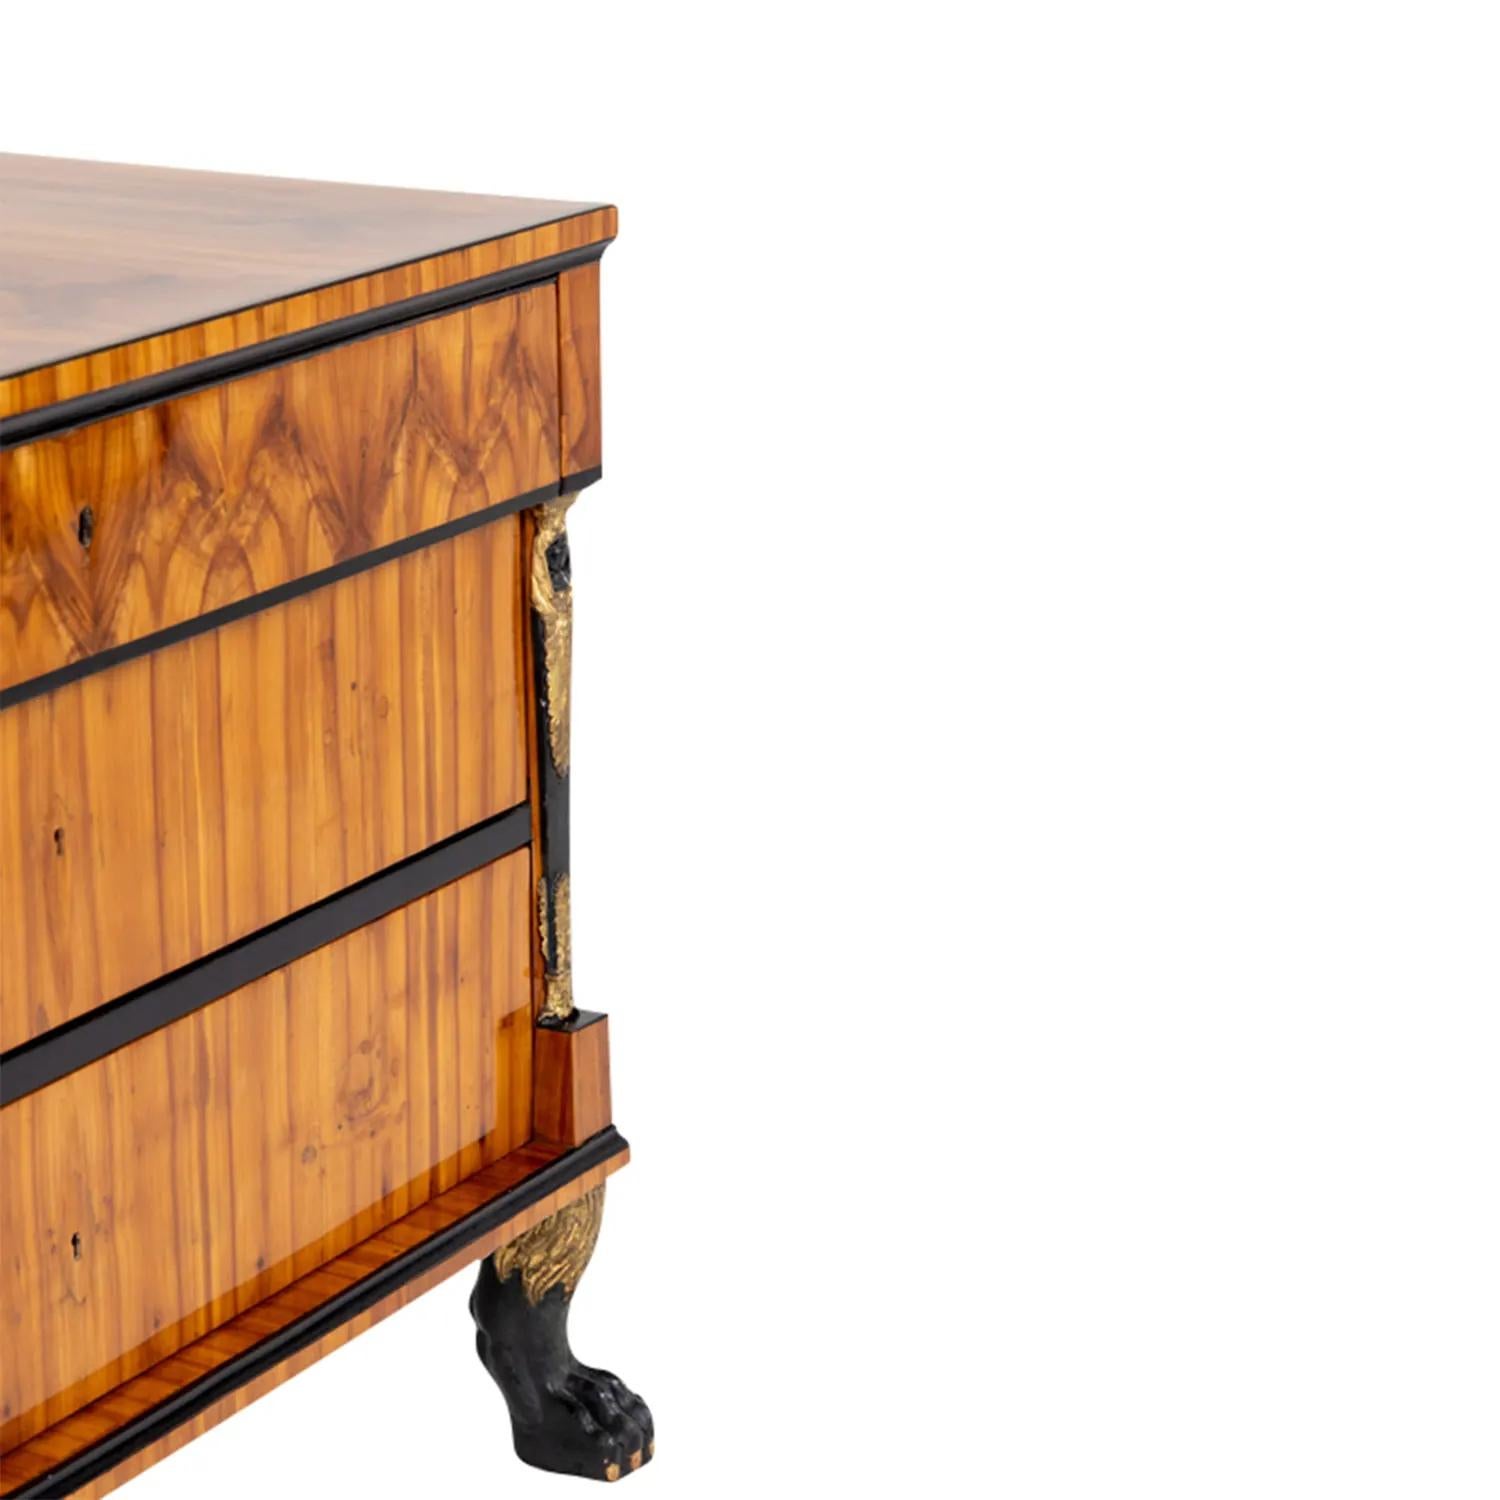 19th Century German Biedermeier Cherrywood Chest of Drawers - Antique Commode For Sale 3